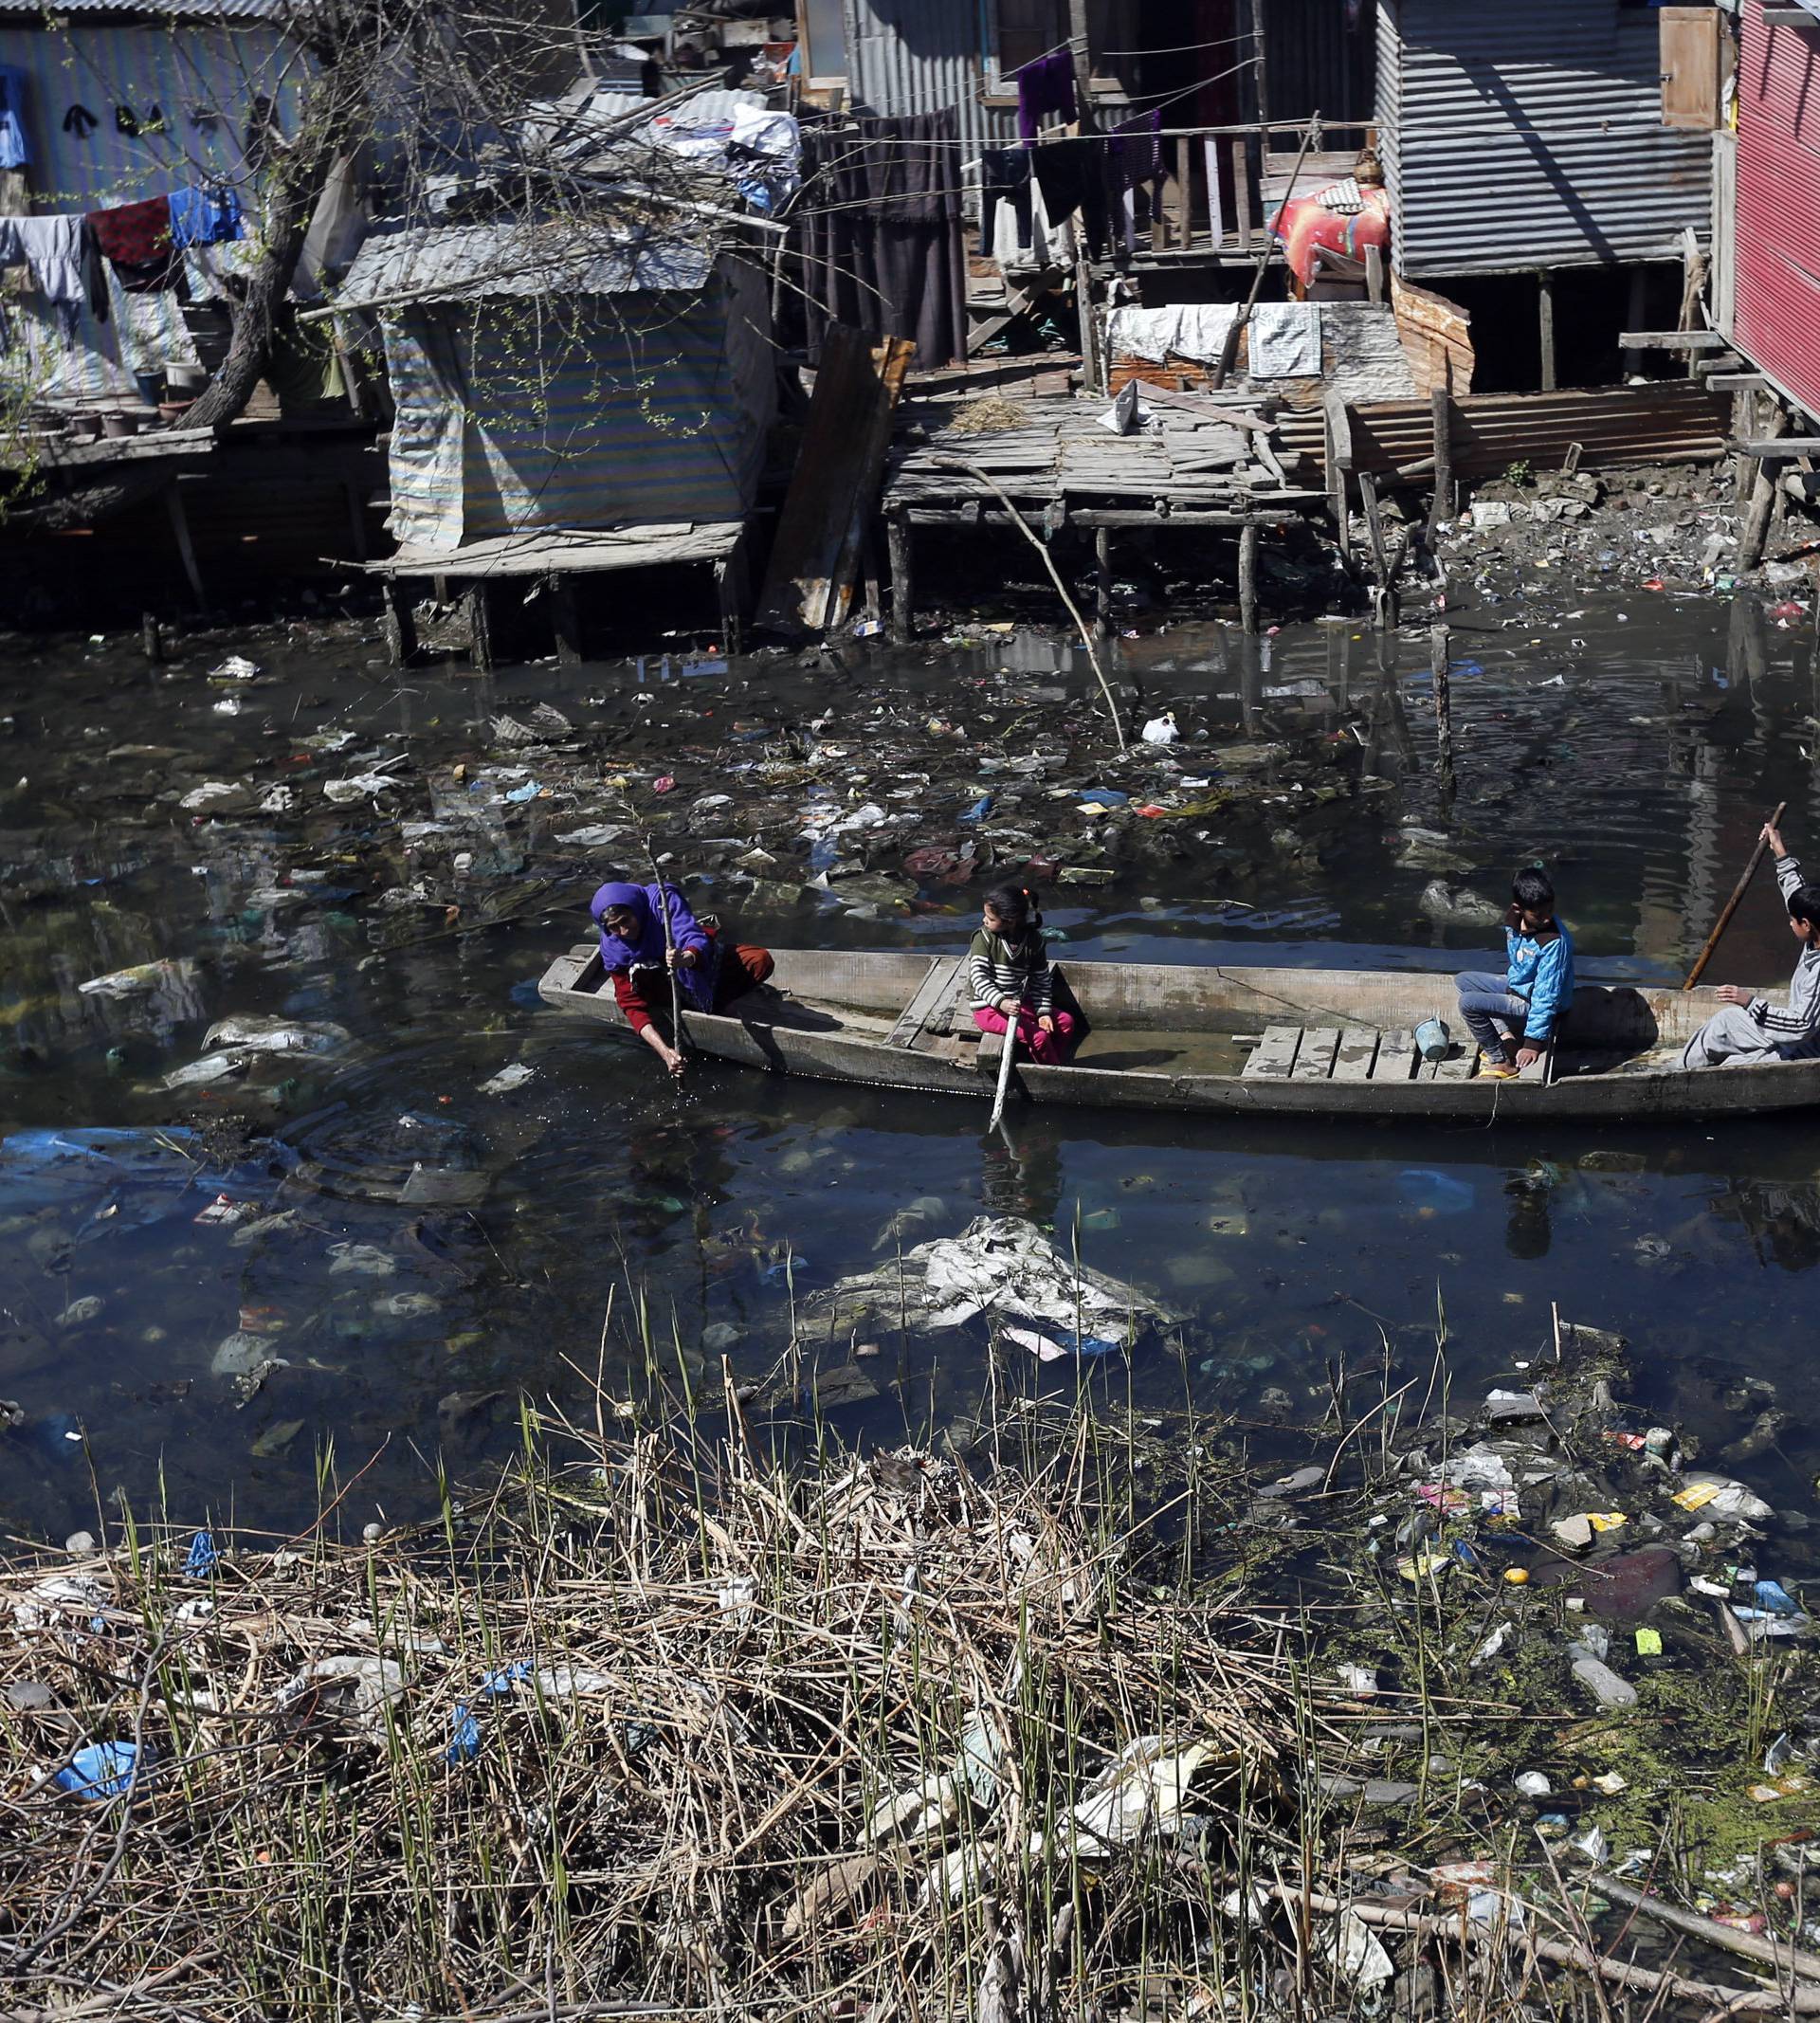 A Kashmiri family looks for scrap wood in a polluted canal near Srinagar in the Kashmir region of India